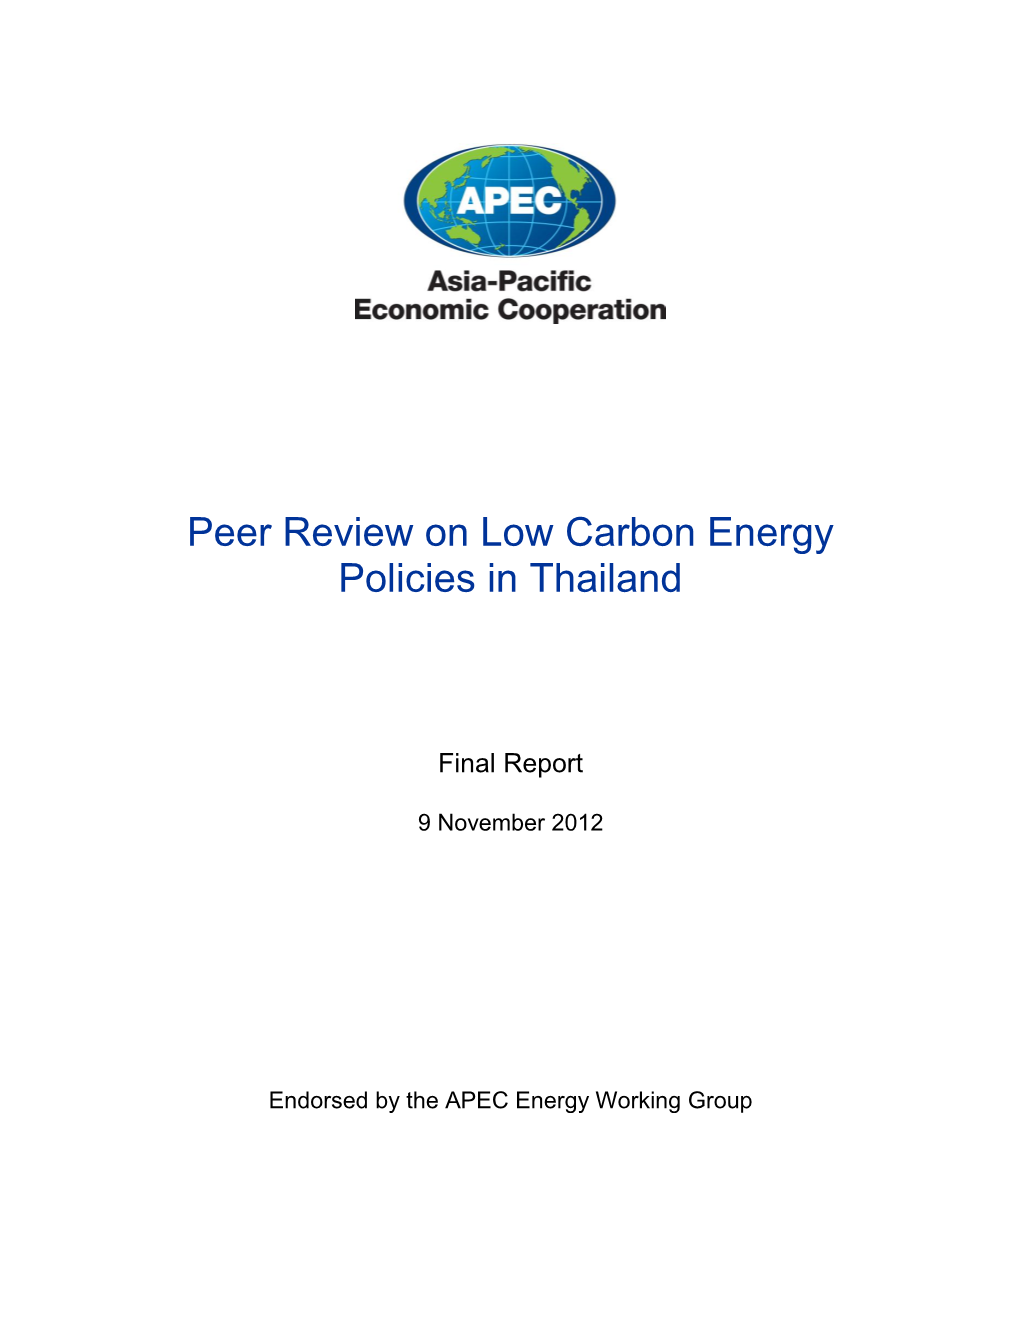 Final Report PRLCE in Thailand